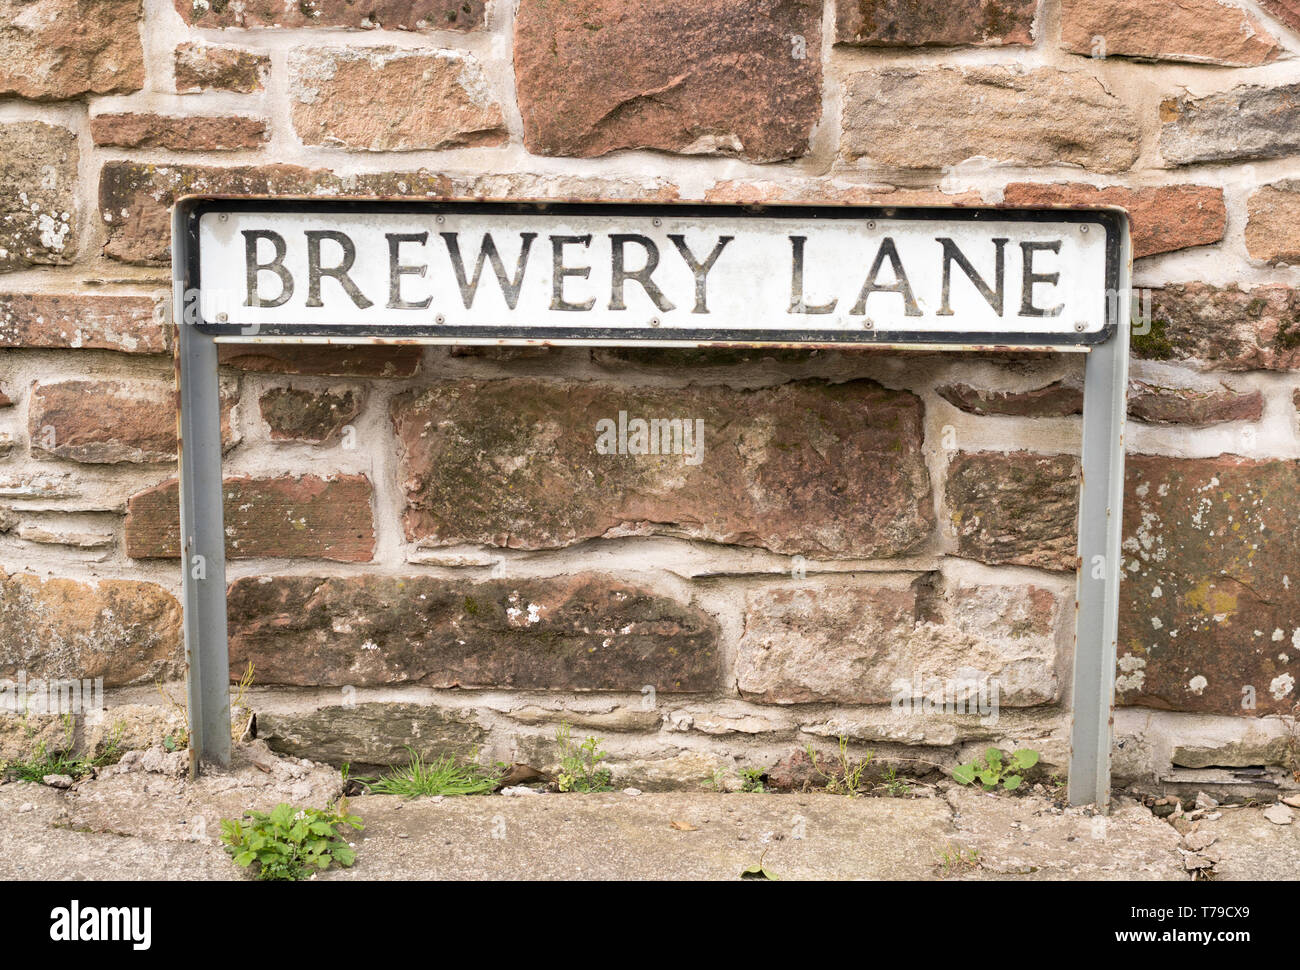 Unusual street sign, Brewery Lane, in Cockermouth, Cumbria, England, UK Stock Photo